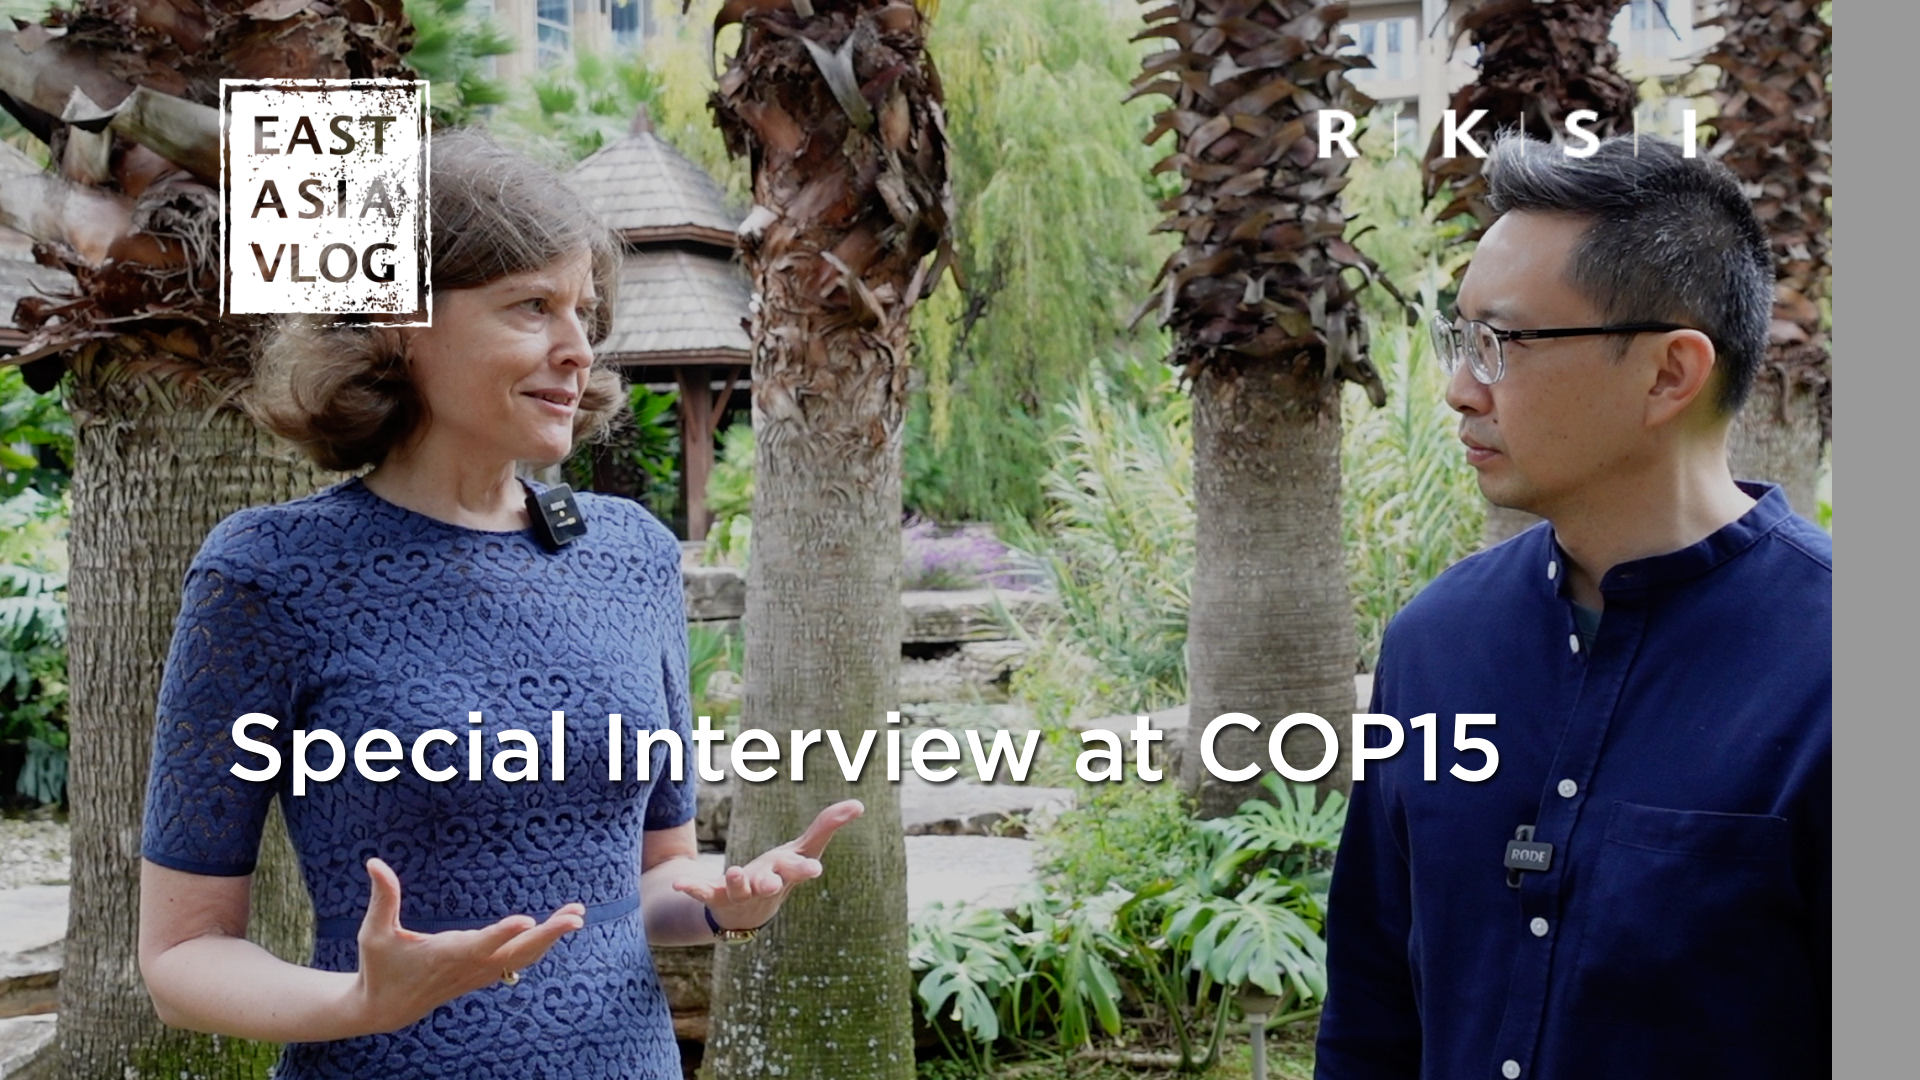 Mass Extinction of Species is Happening, Should We Care? Episode 2. Special Interview with Yolanda Fernandez Lommen at COP15